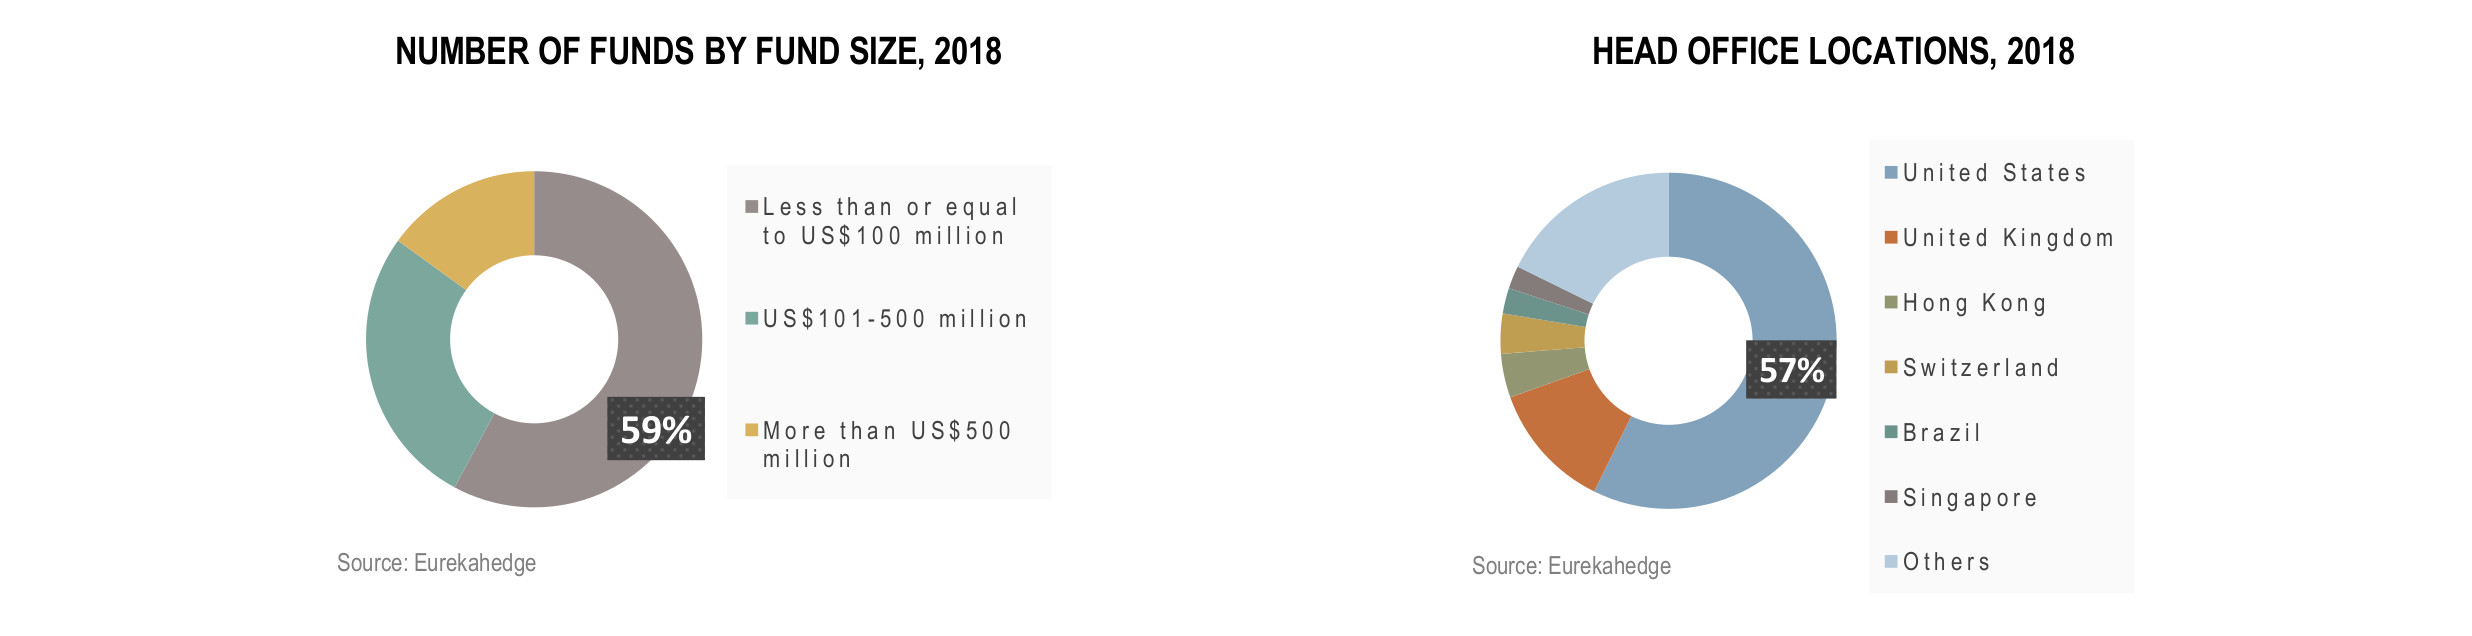 Global Hedge Funds Infographic January 2019 - number of funds by fund size, number of funds by head office locations